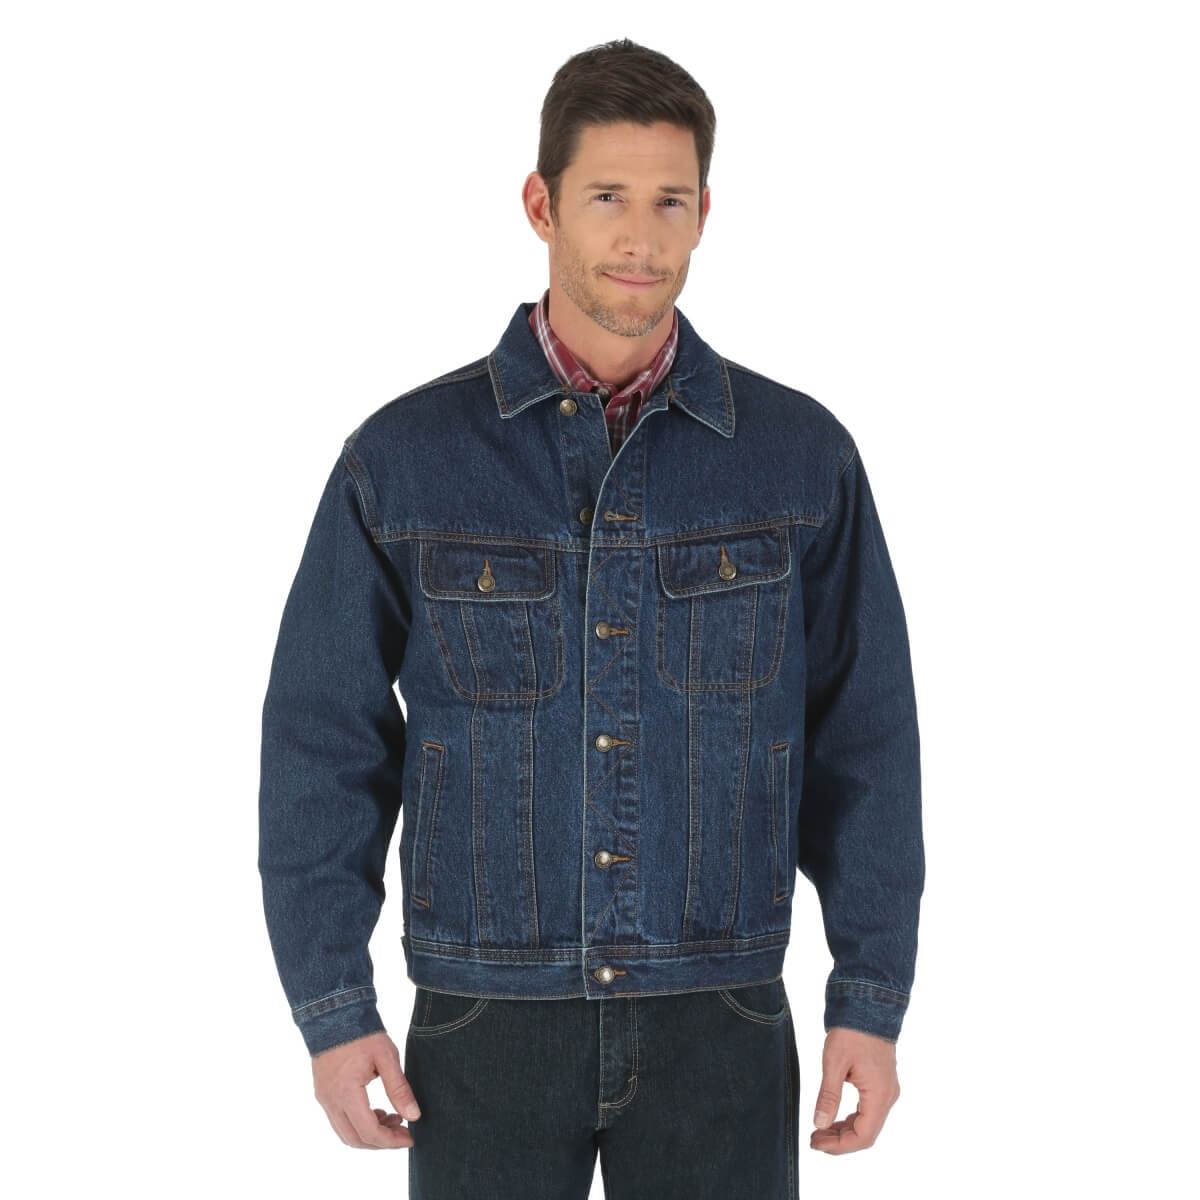 Wrangler Men's Conceal and Carry Blanket Lined Denim Jacket - 731610,  Jackets, Coats & Rain Gear at Sportsman's Guide